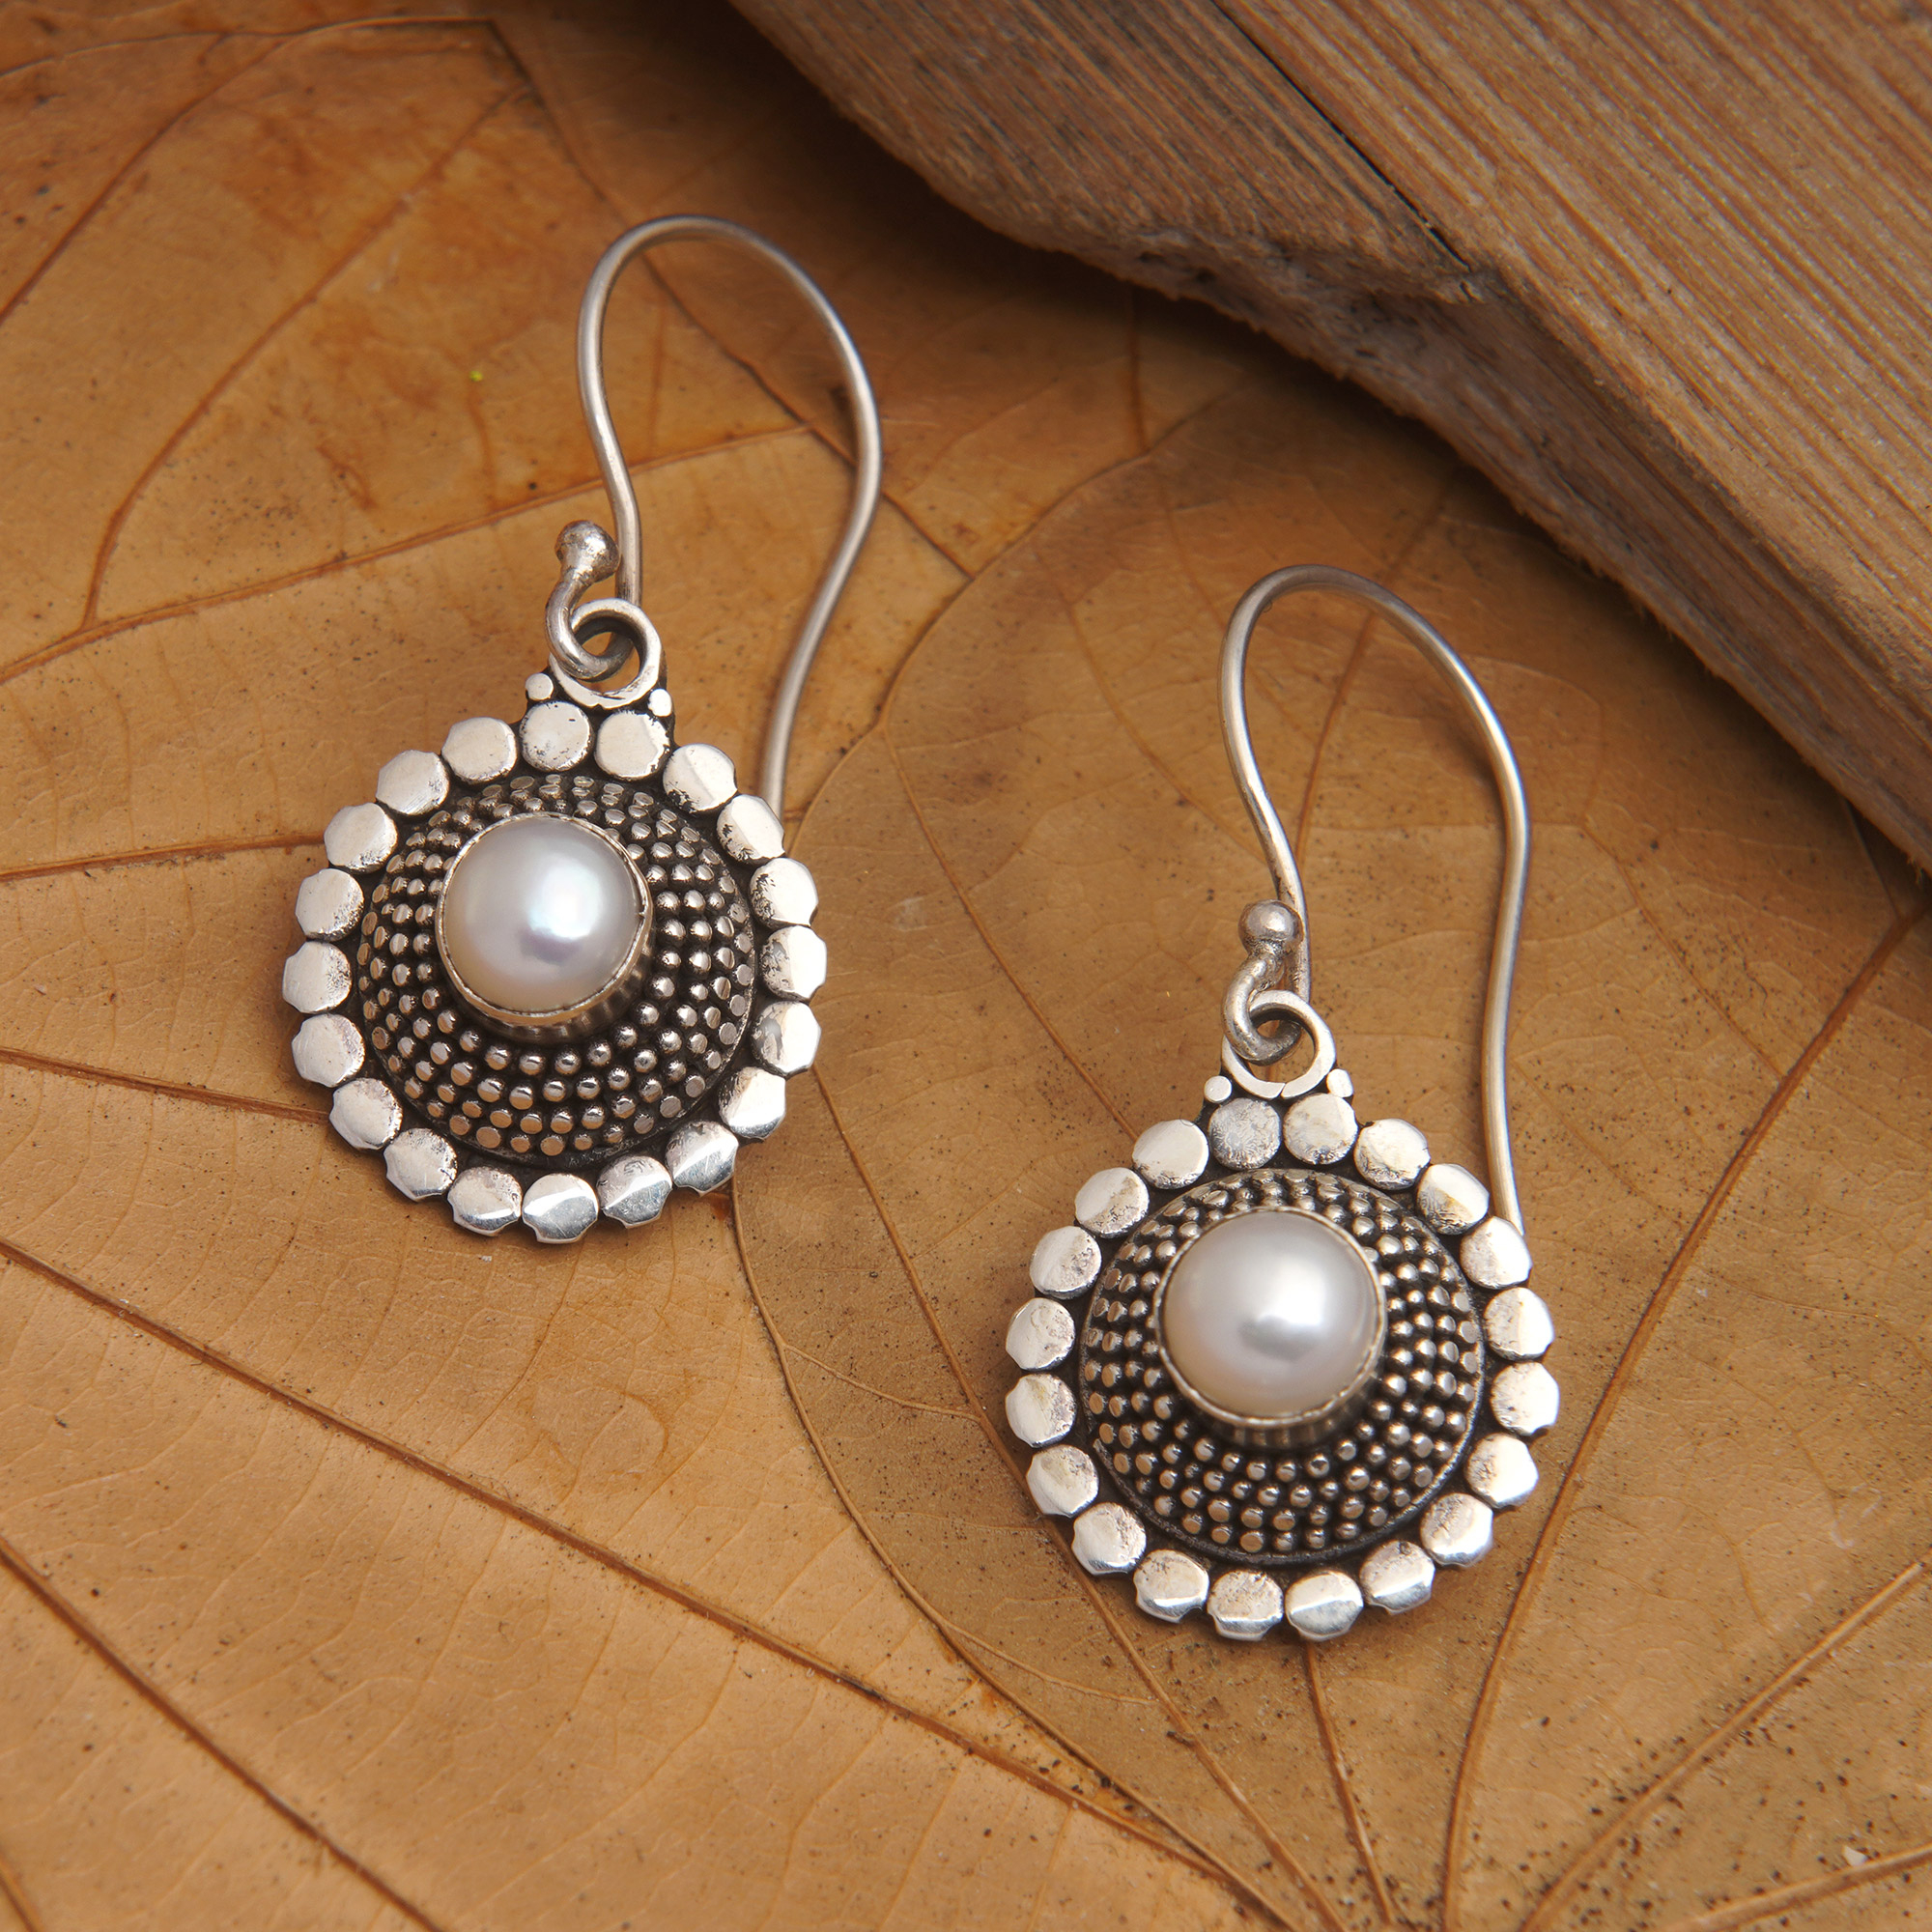 Round Sterling Silver Dangle Earrings with Cultured Pearls - Ancestral Core